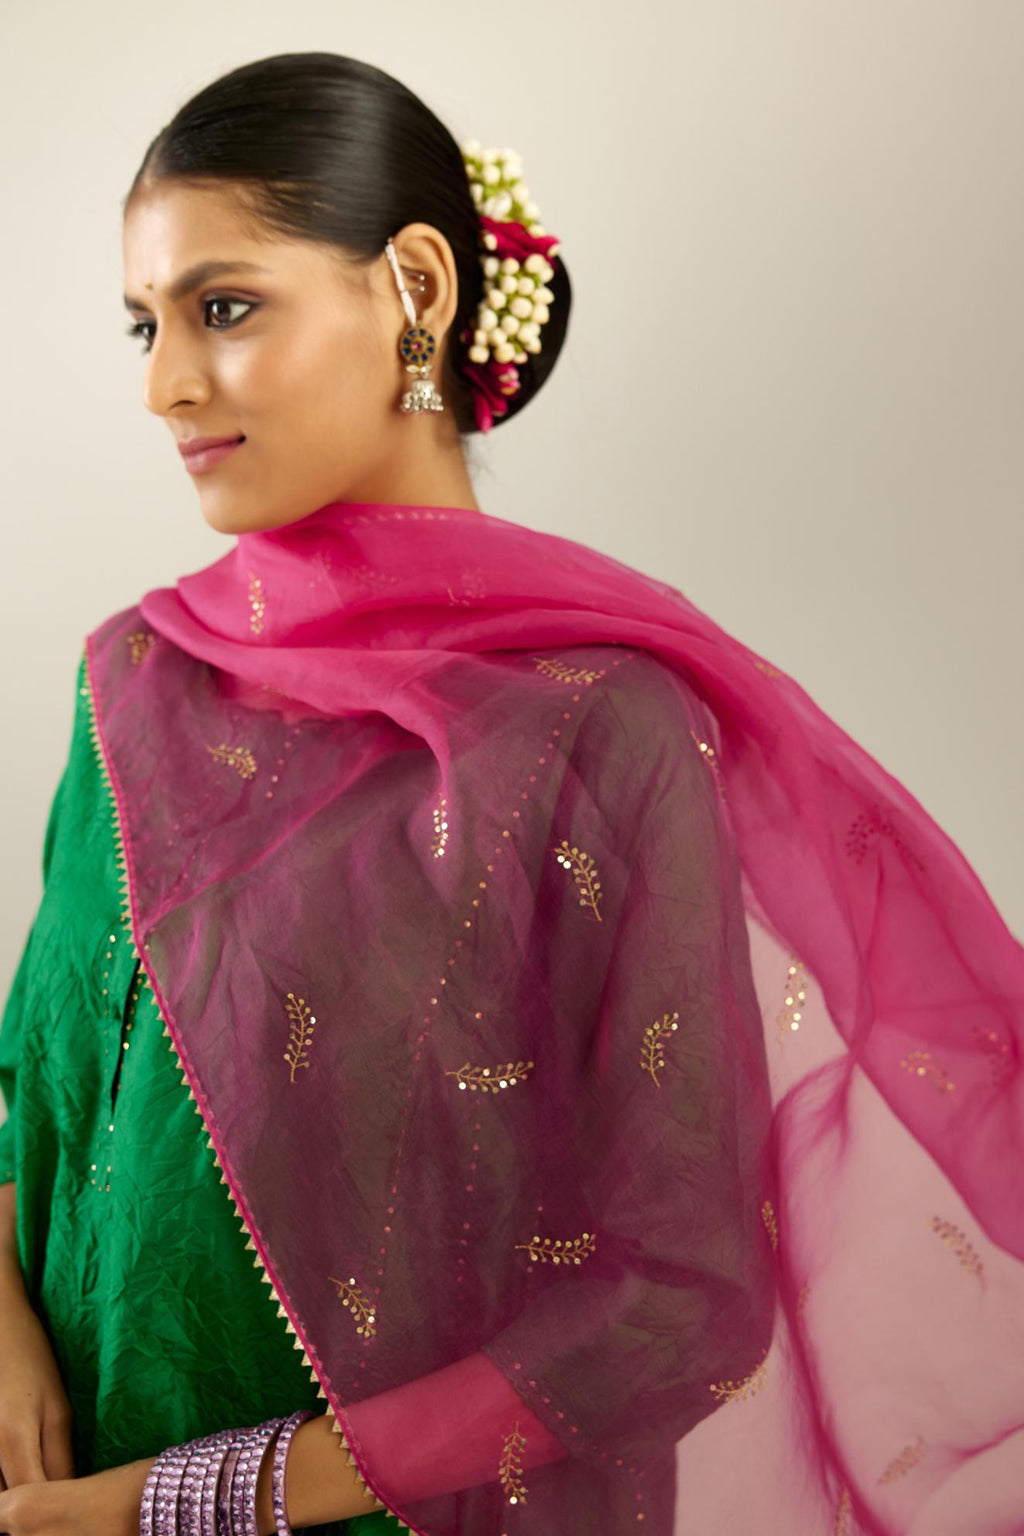 Raspberry silk organza dupatta with embroidered leaf clusters on all four corners of the dupatta and small leaf motif sprayed all over it